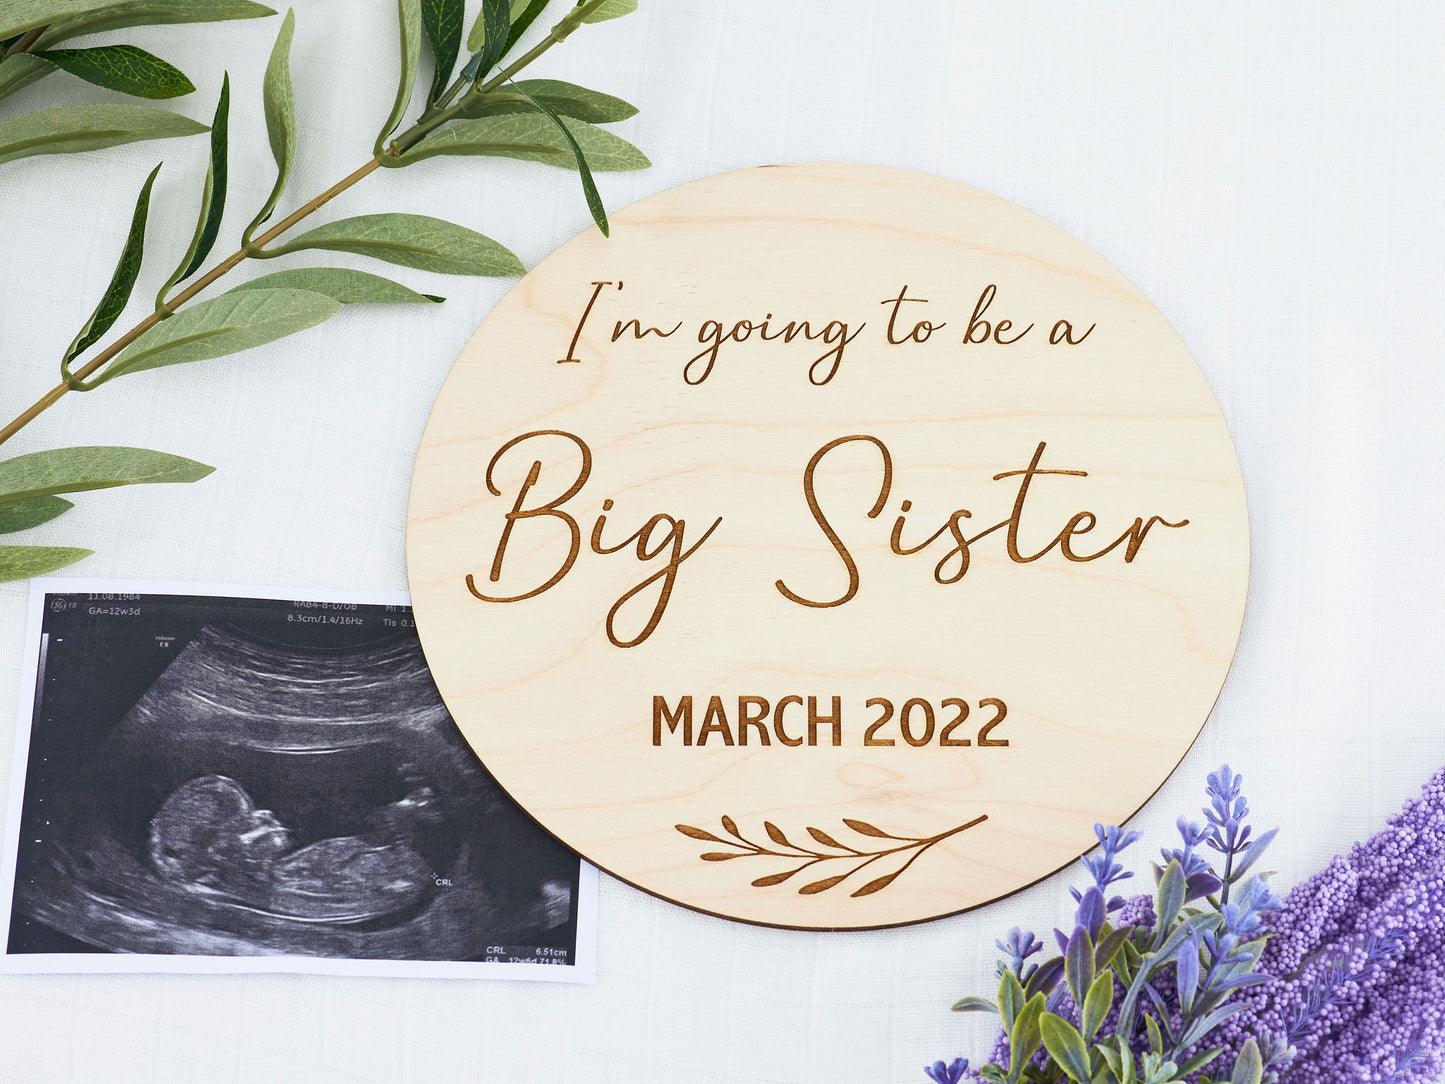 "I'm going to be a Big Brother/Sister" Plaque Promoted Miss Ali's   